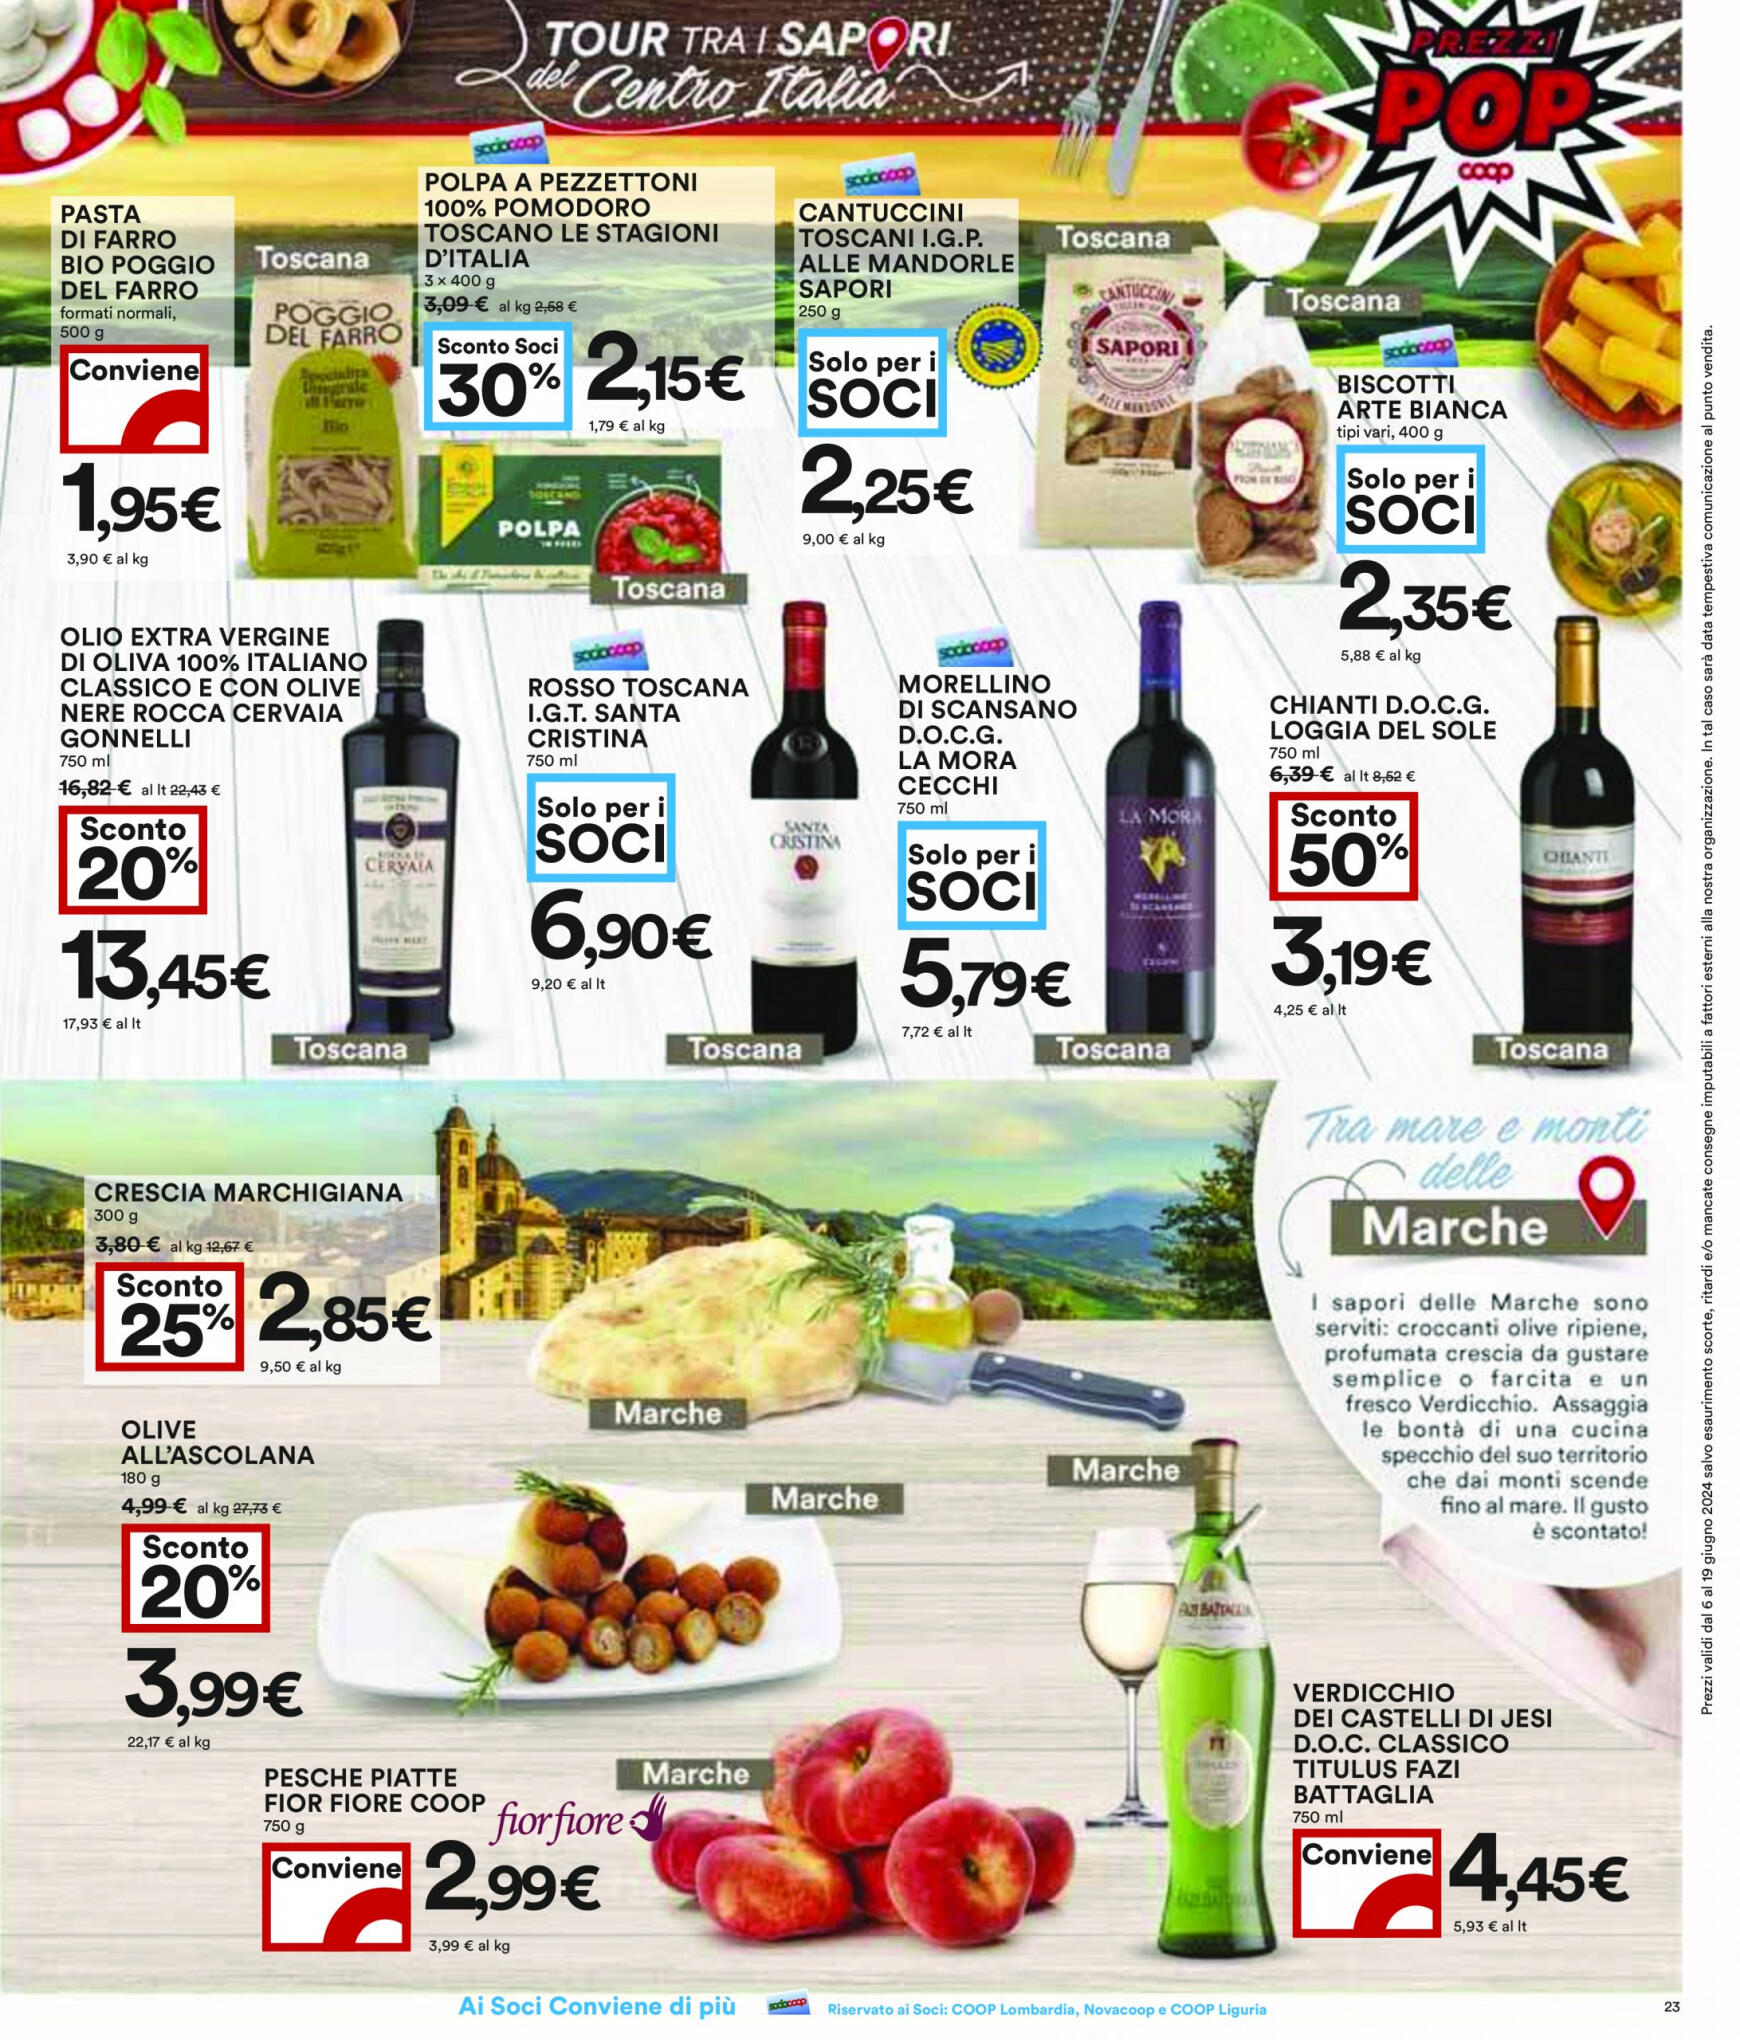 coop - Nuovo volantino Coop 10.06. - 19.06. - page: 23